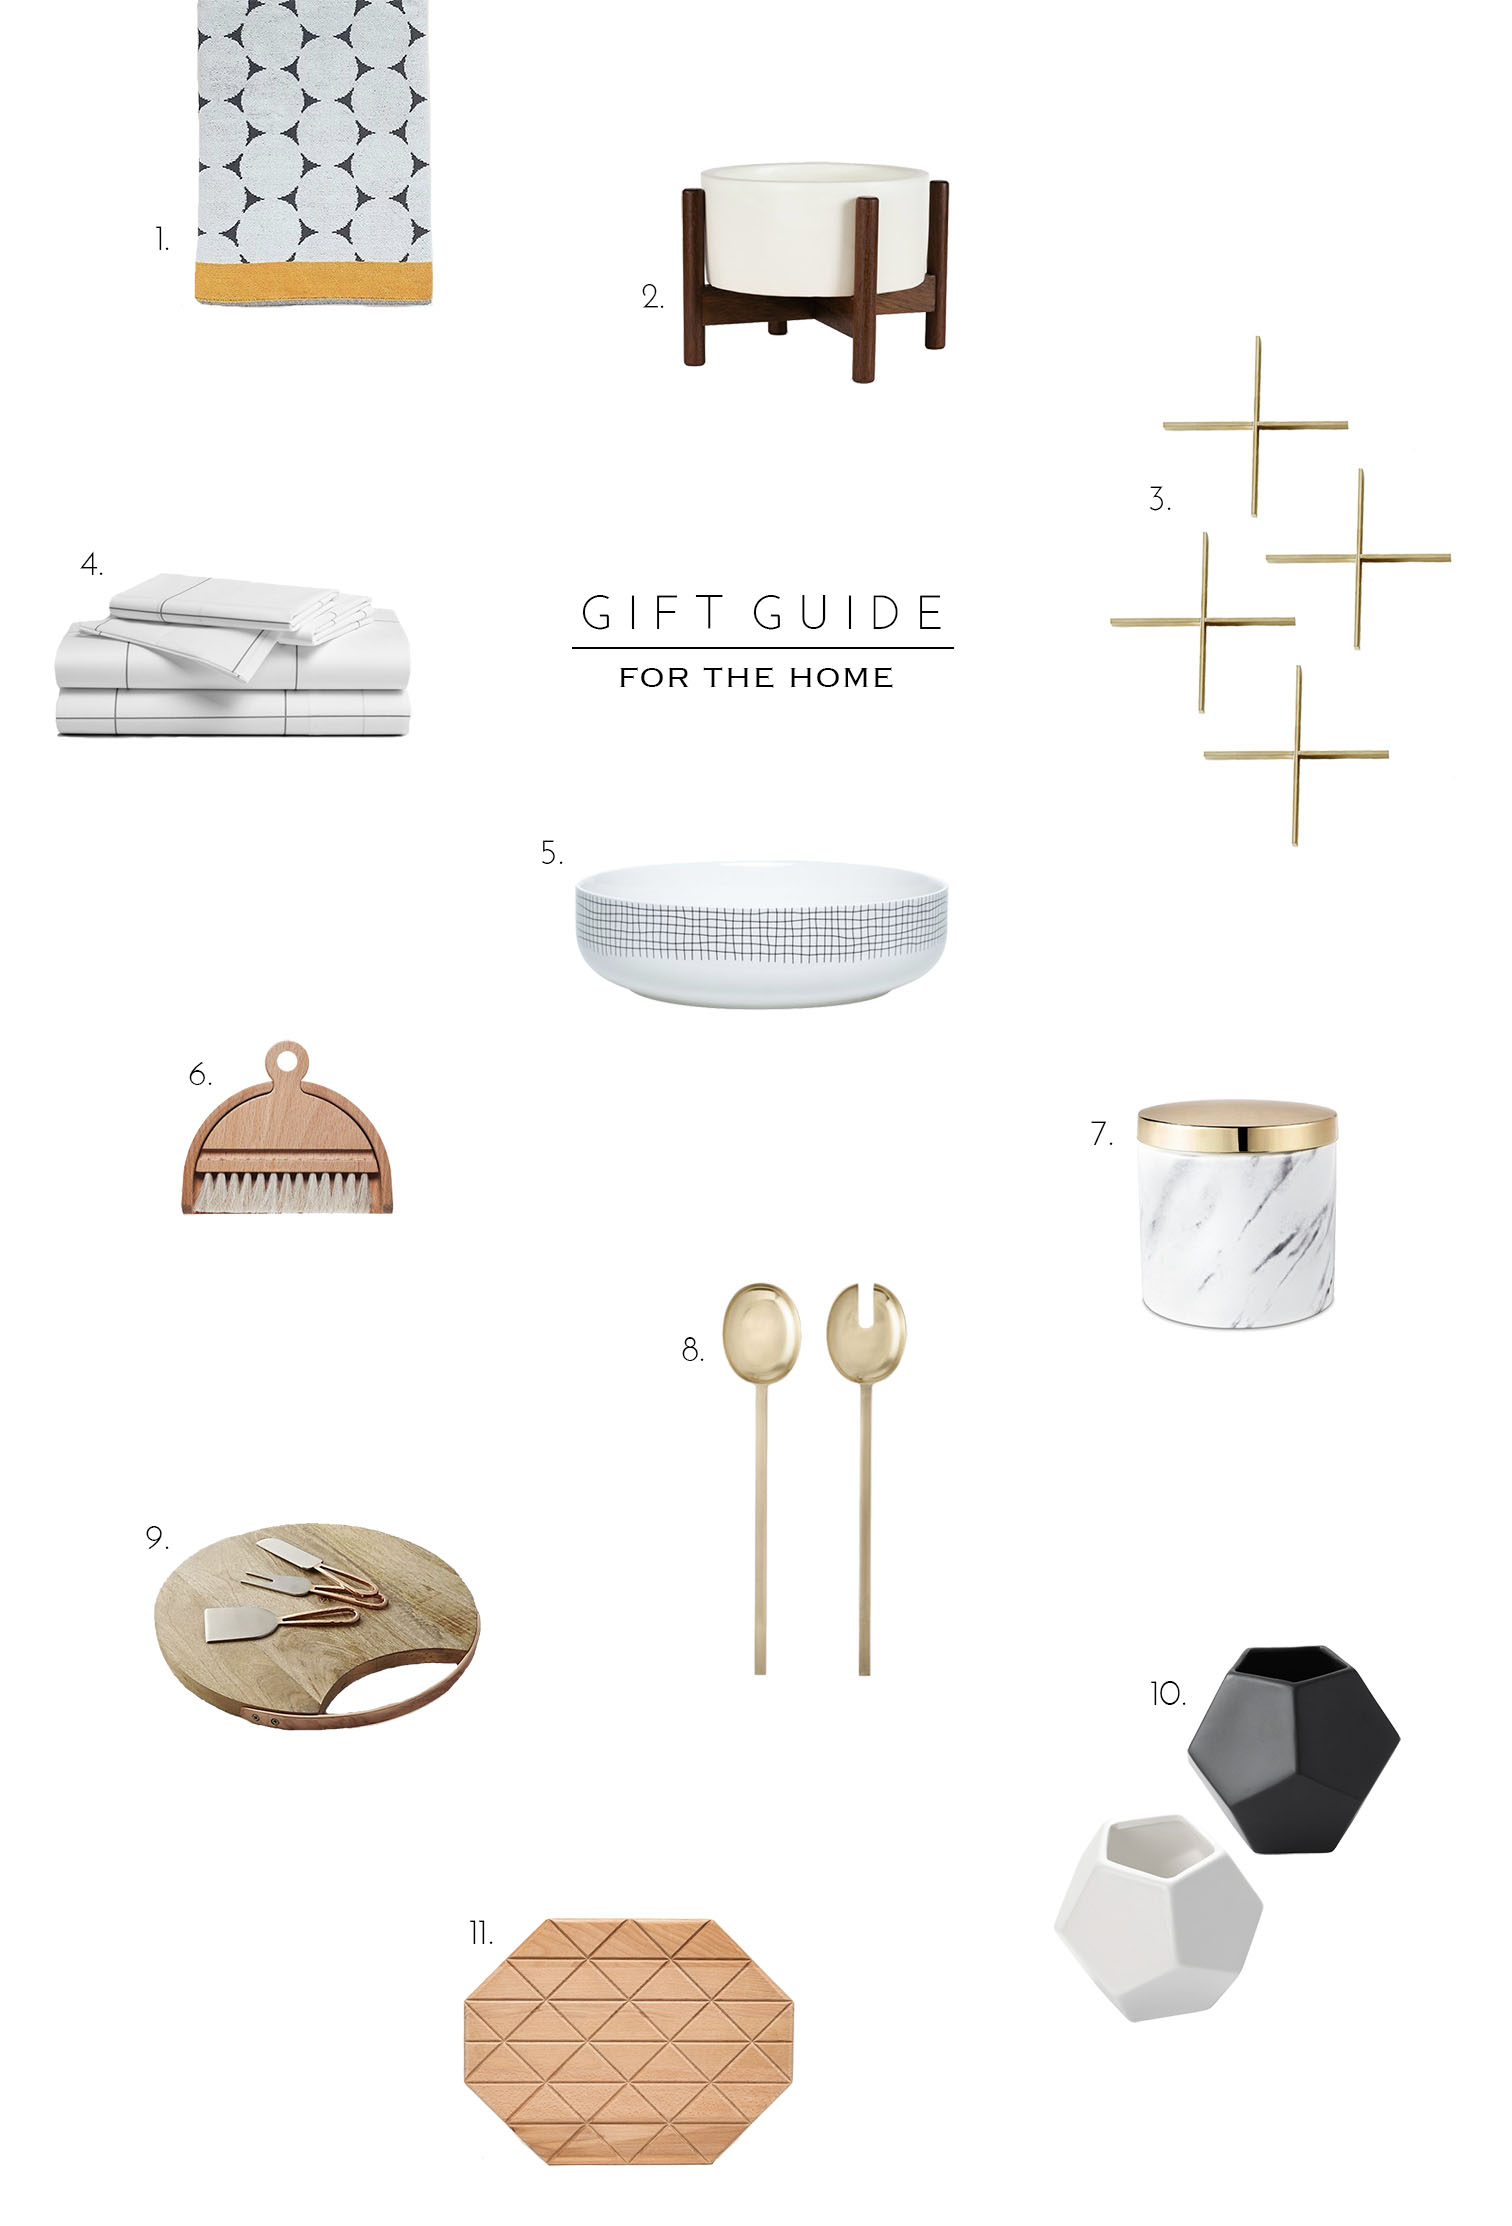 Shop: Gift Guide for the Home